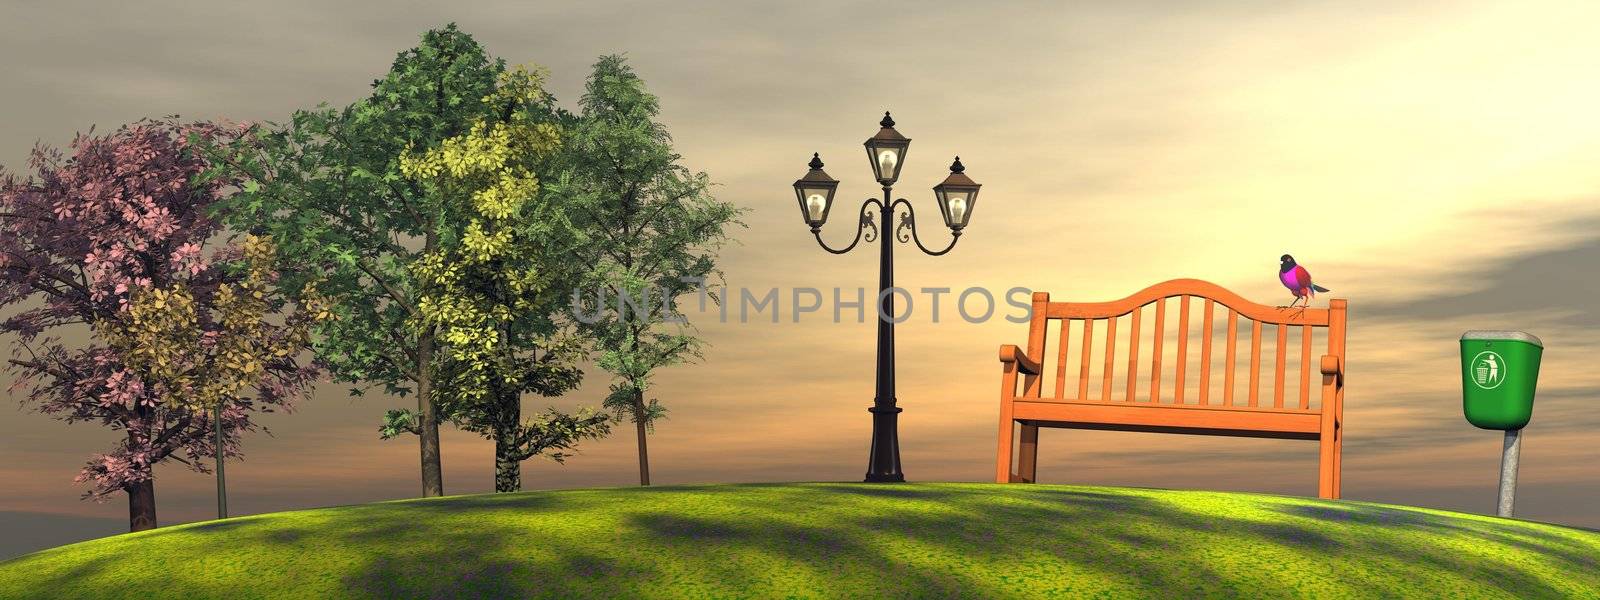 Colorful bird on a wood bench in a park with bin, lamp and trees by sunset